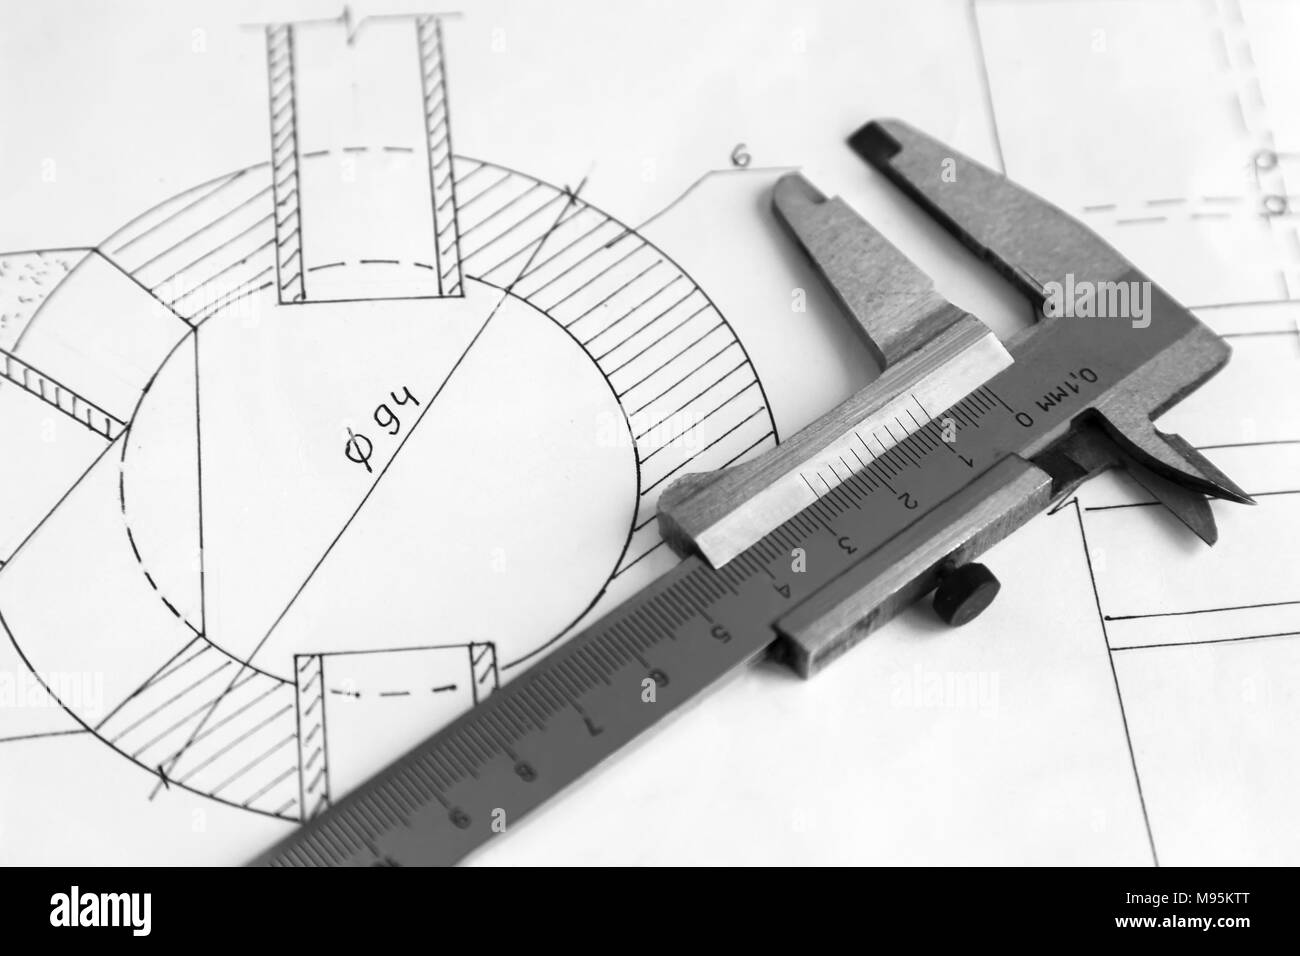 On the detail drawing lies measuring tool Vernier caliper. Black and white image. Stock Photo